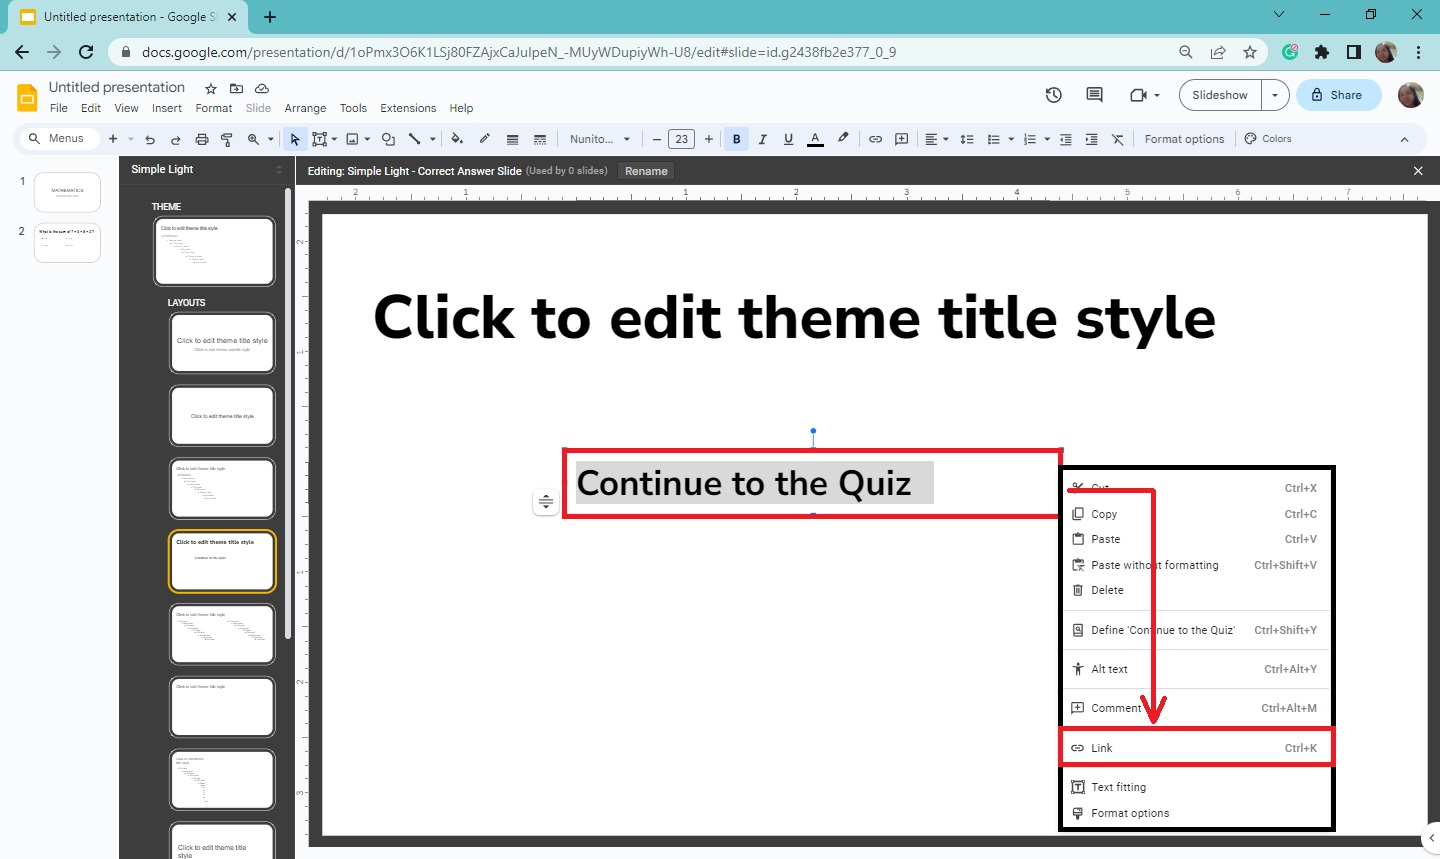 Double click the text box and type "Continue to the quiz" and right click to select "Link" from the context menu.